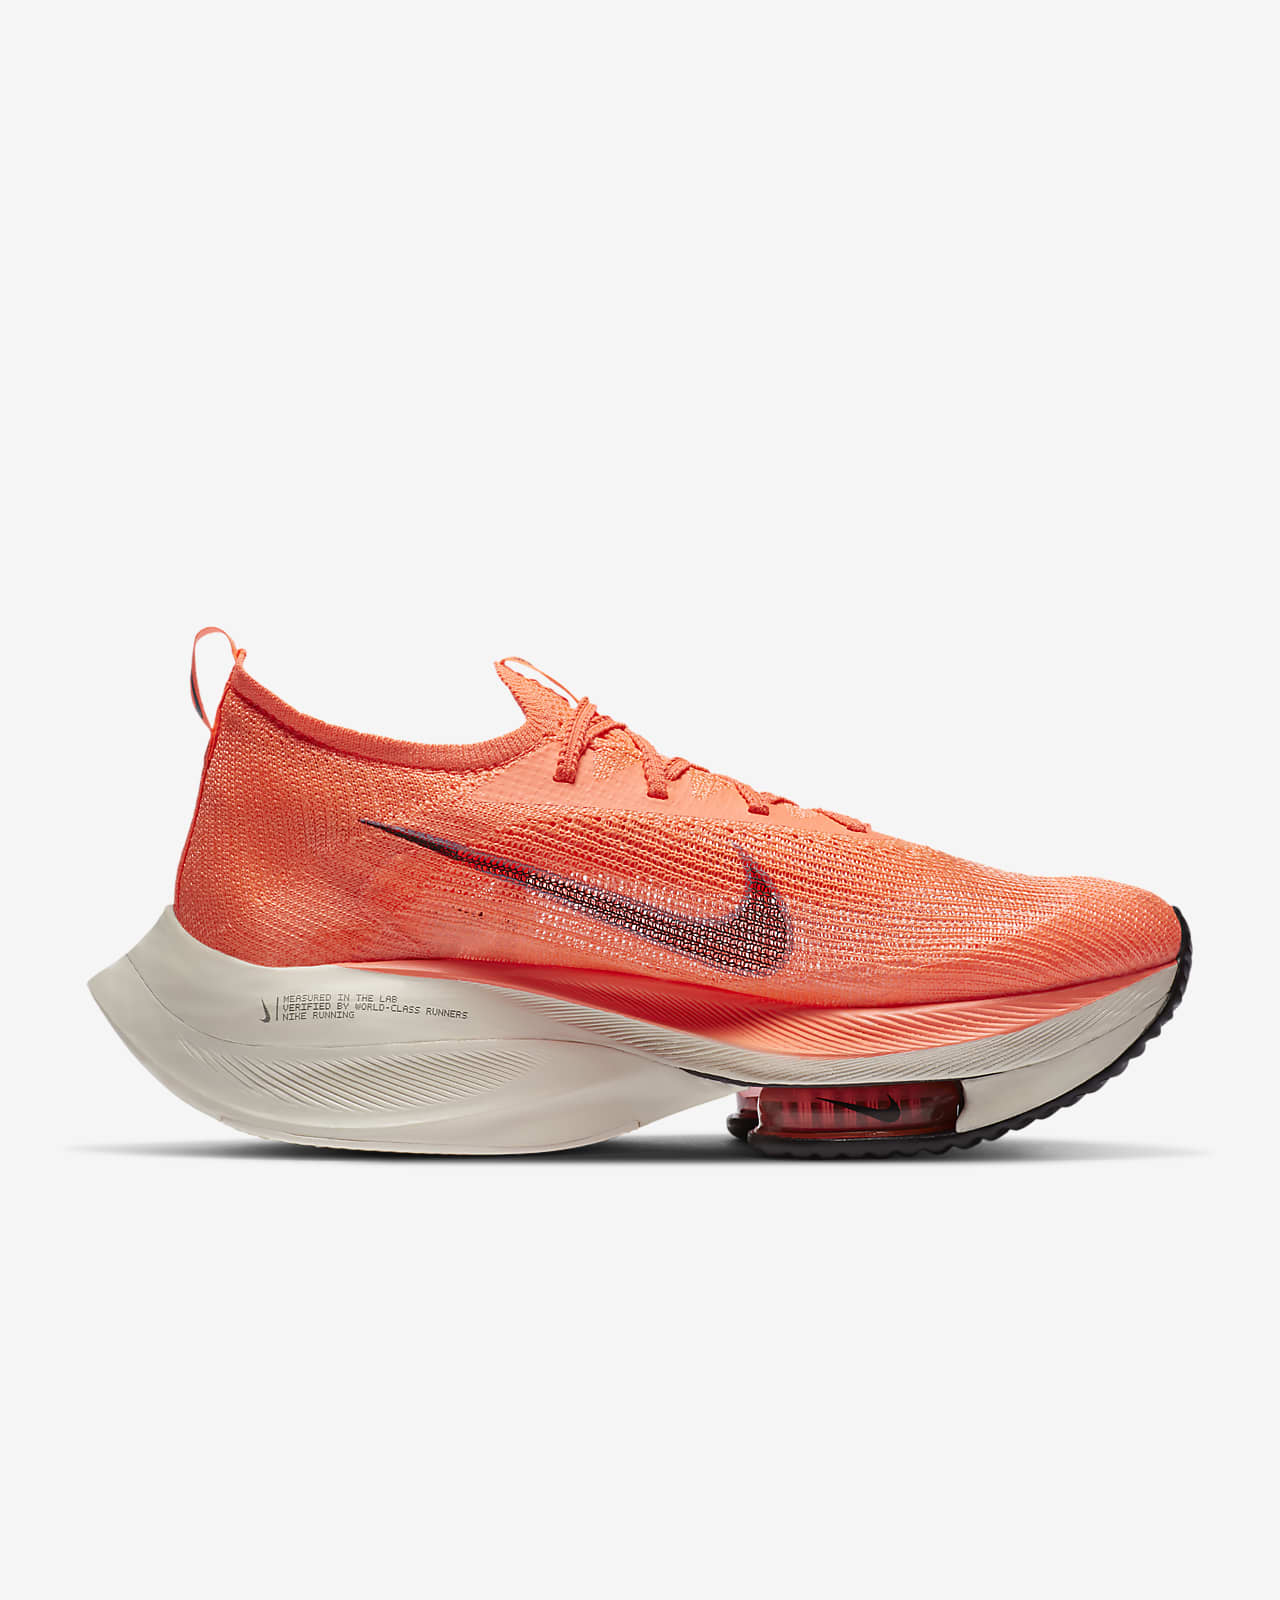 nike alpha running shoes